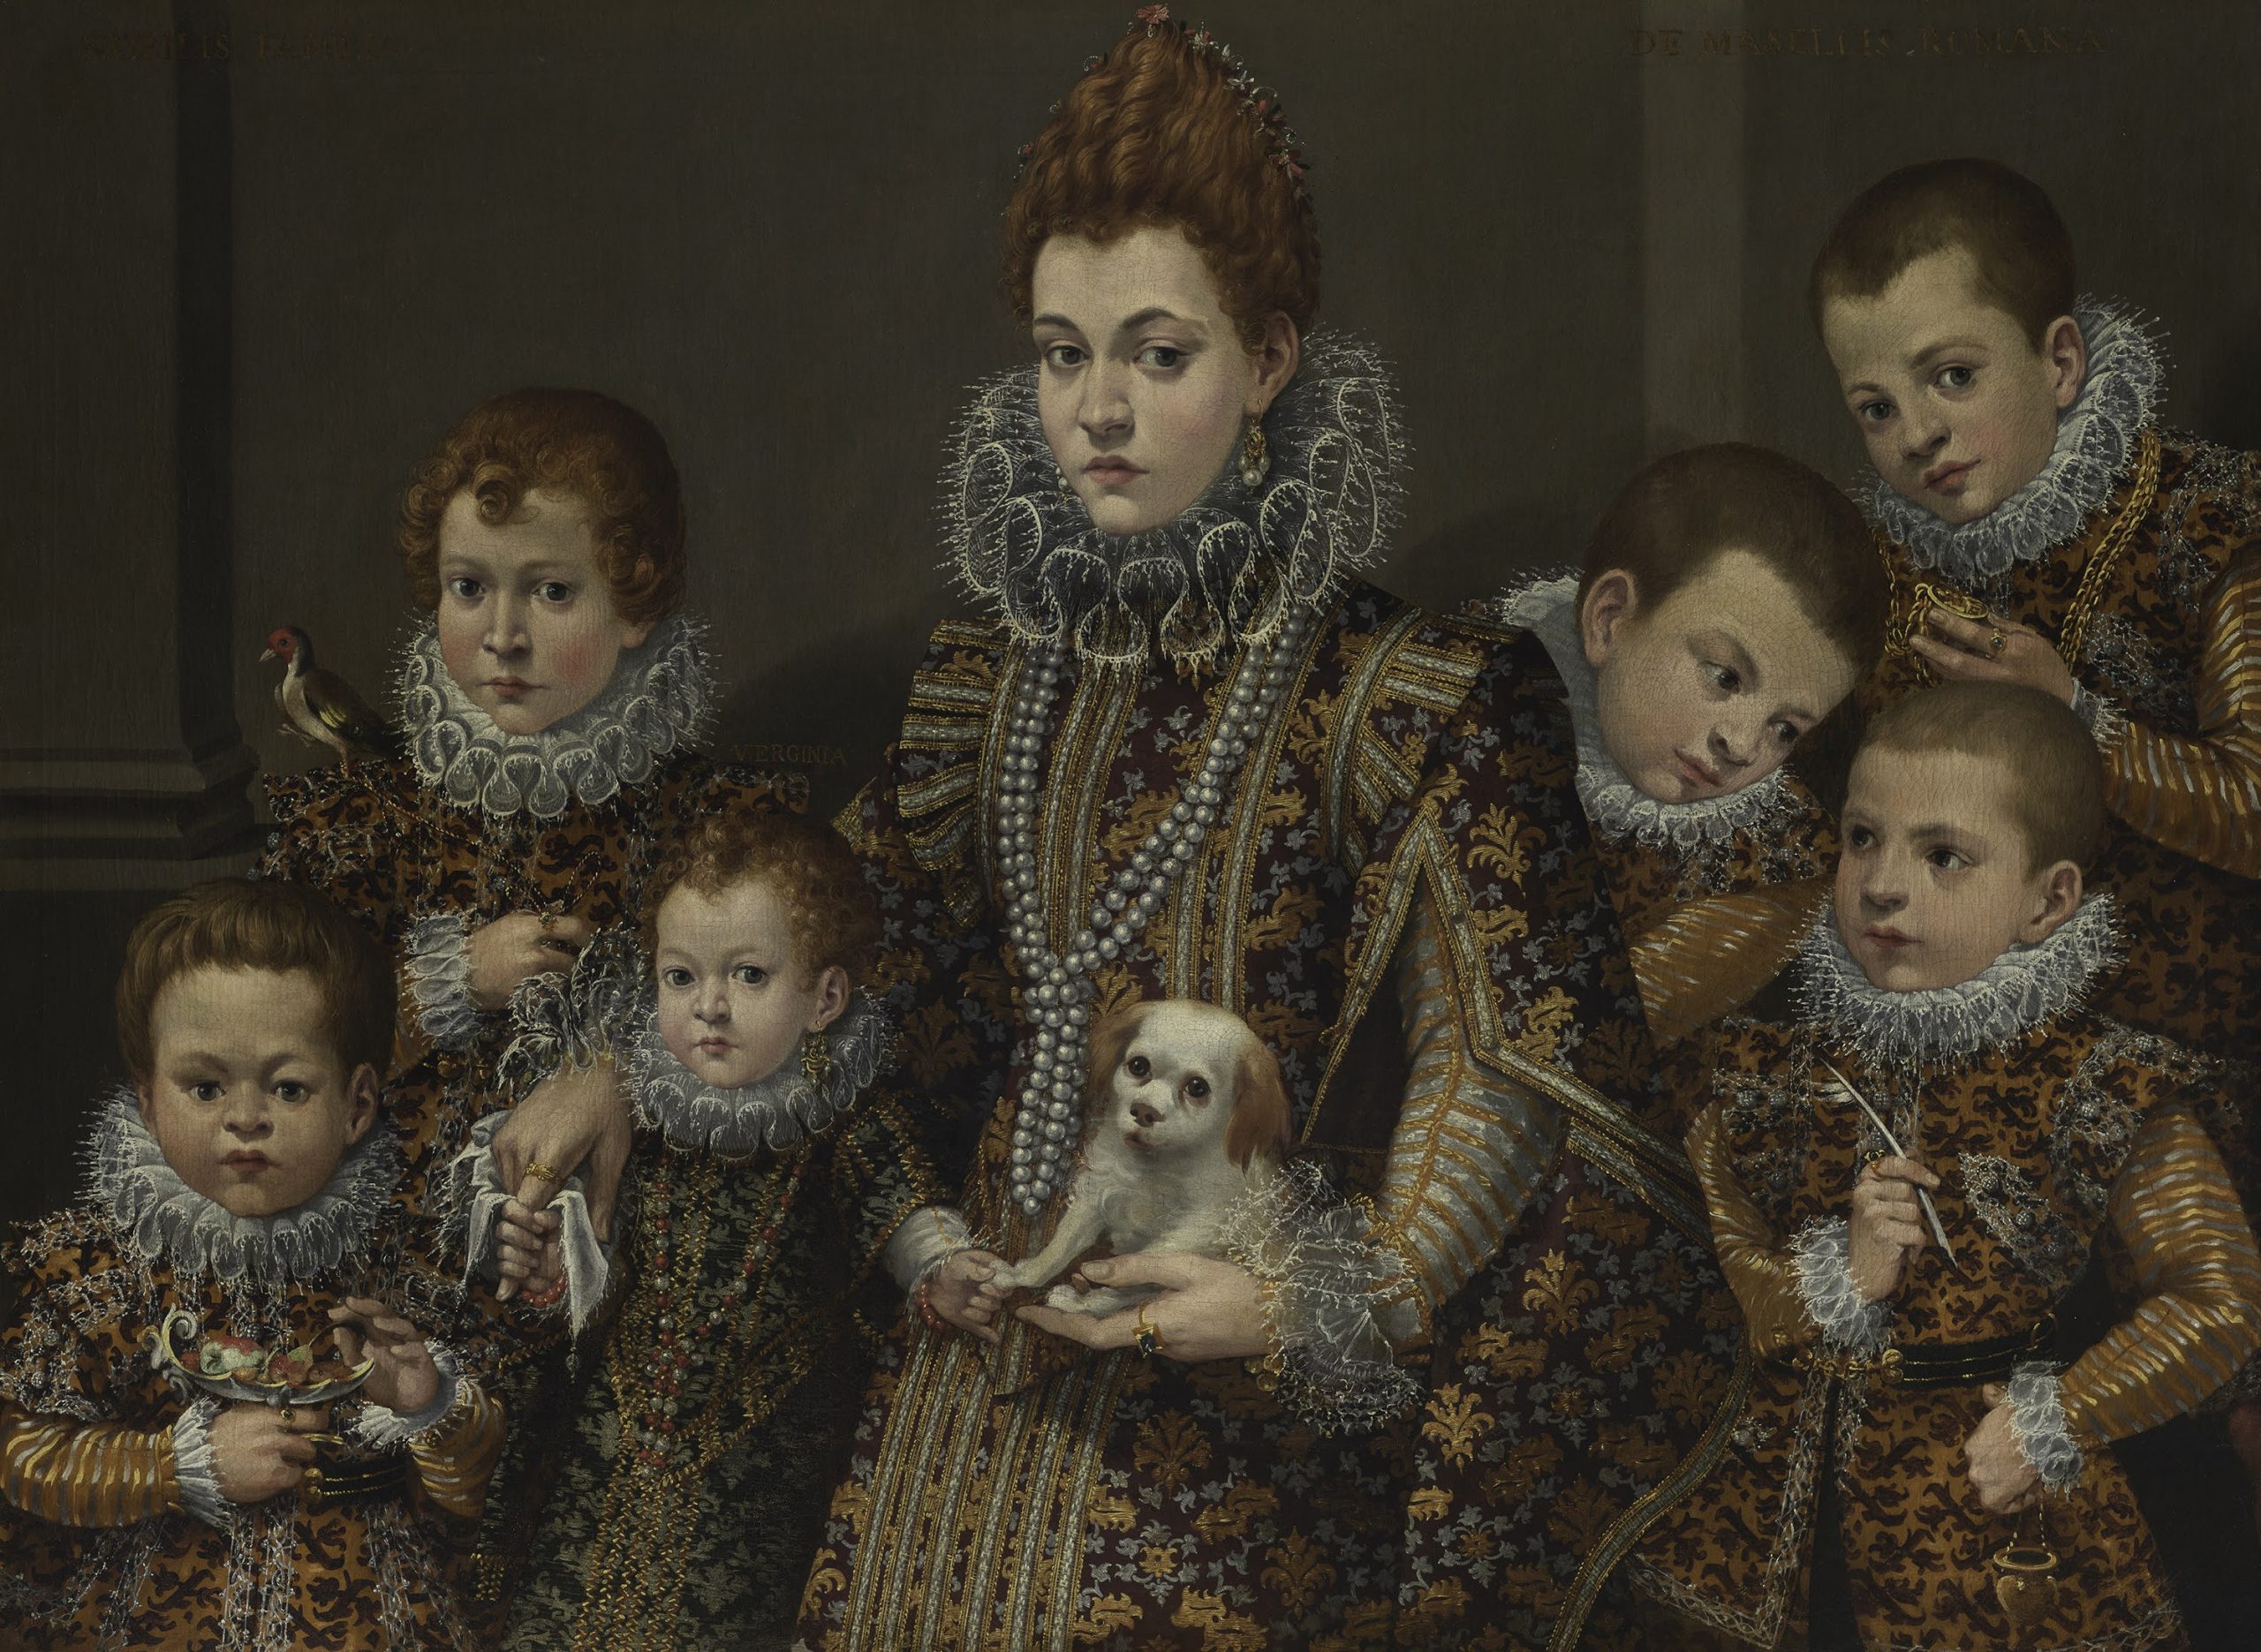 Lavinia Fontana Portrait Joins Museum Collection After 400 Years